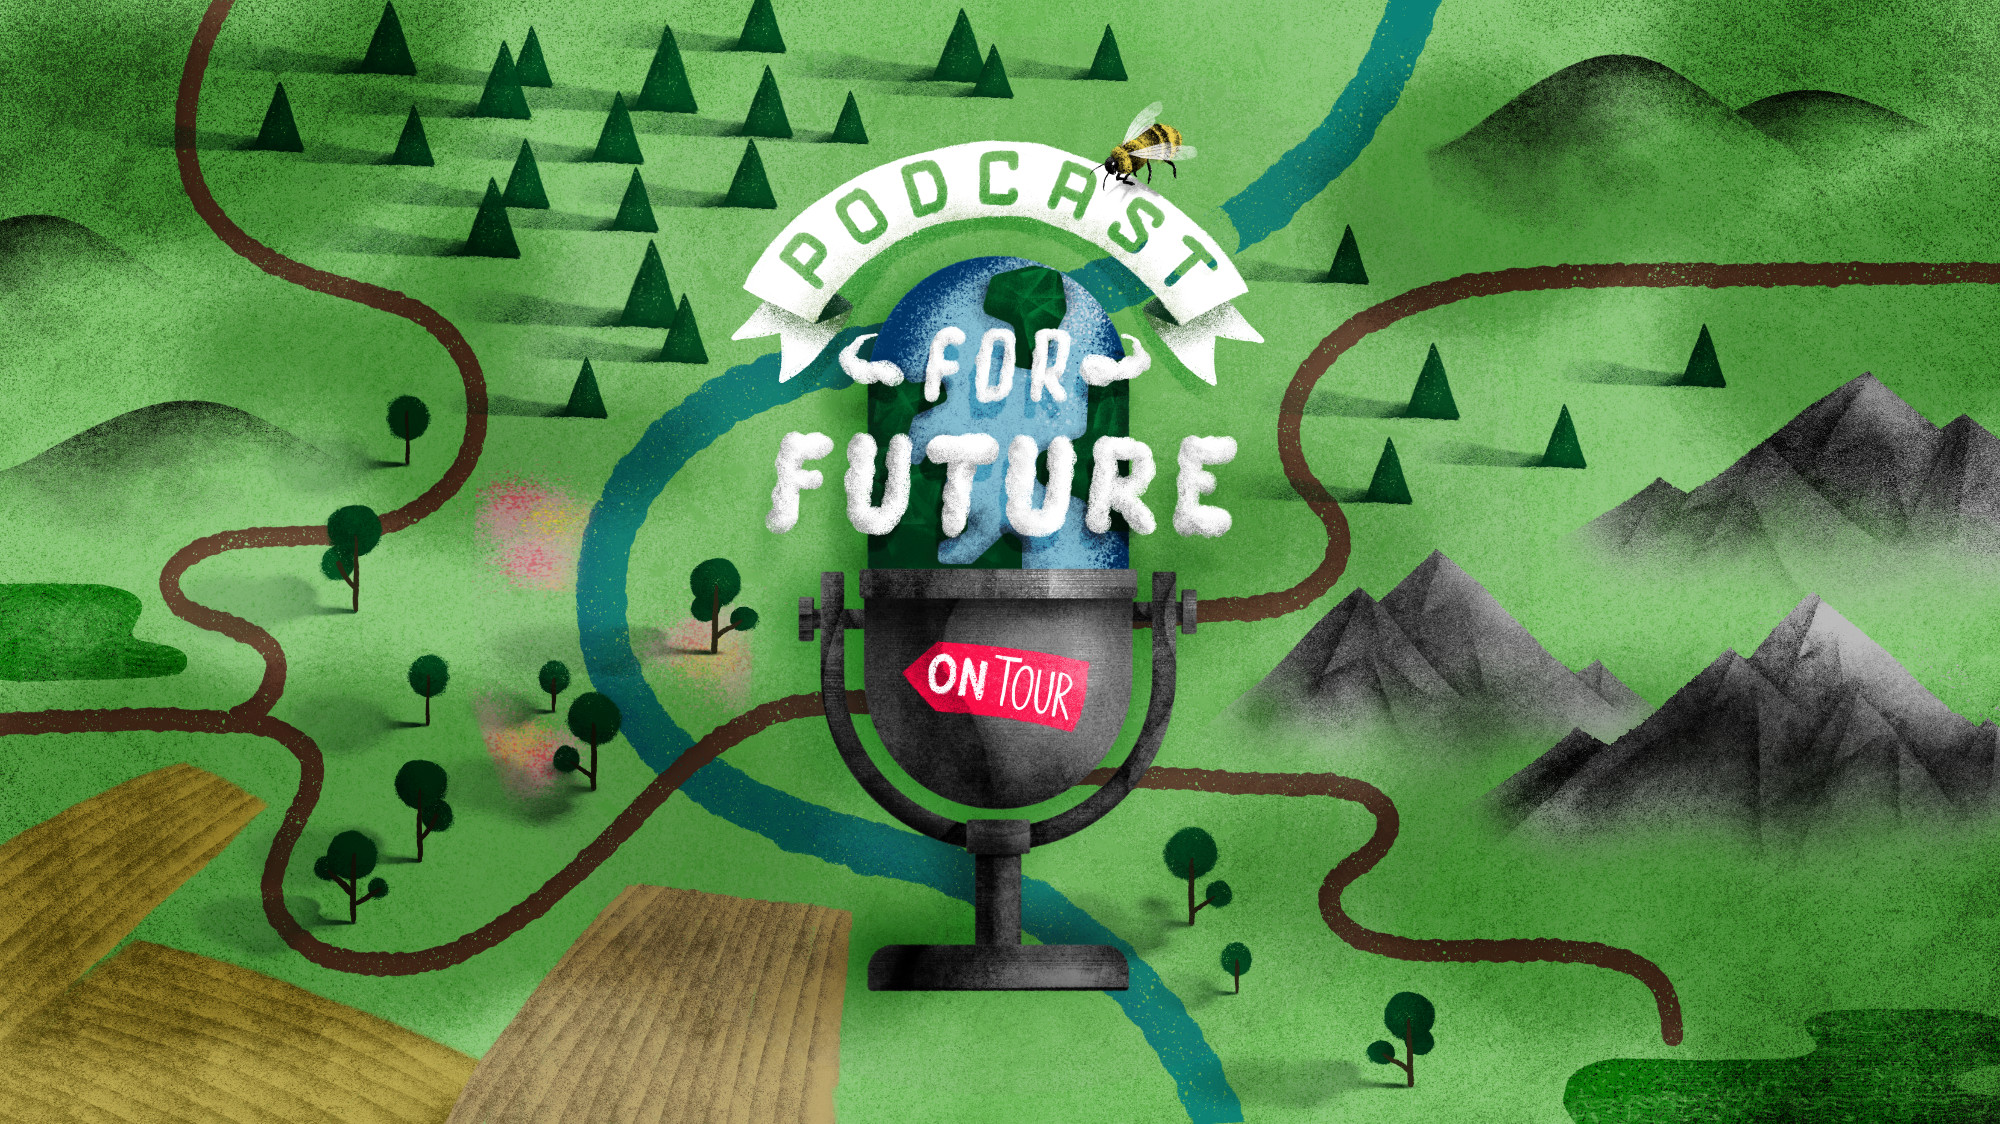 Podcast for future on tour Radio FRO